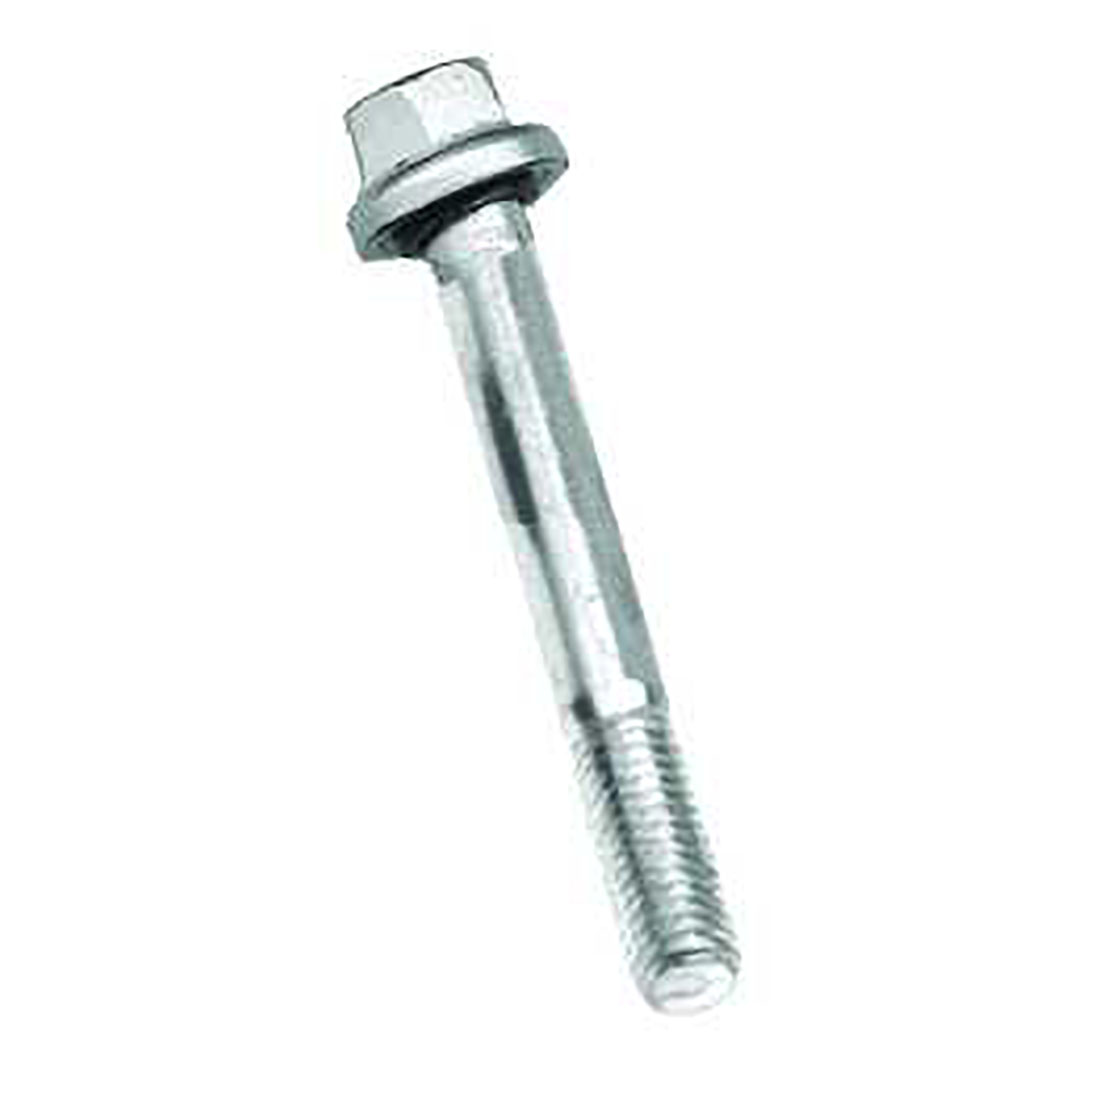 Outboard Gear Housing Bolt Johnson Evrinrude Replaces 320041